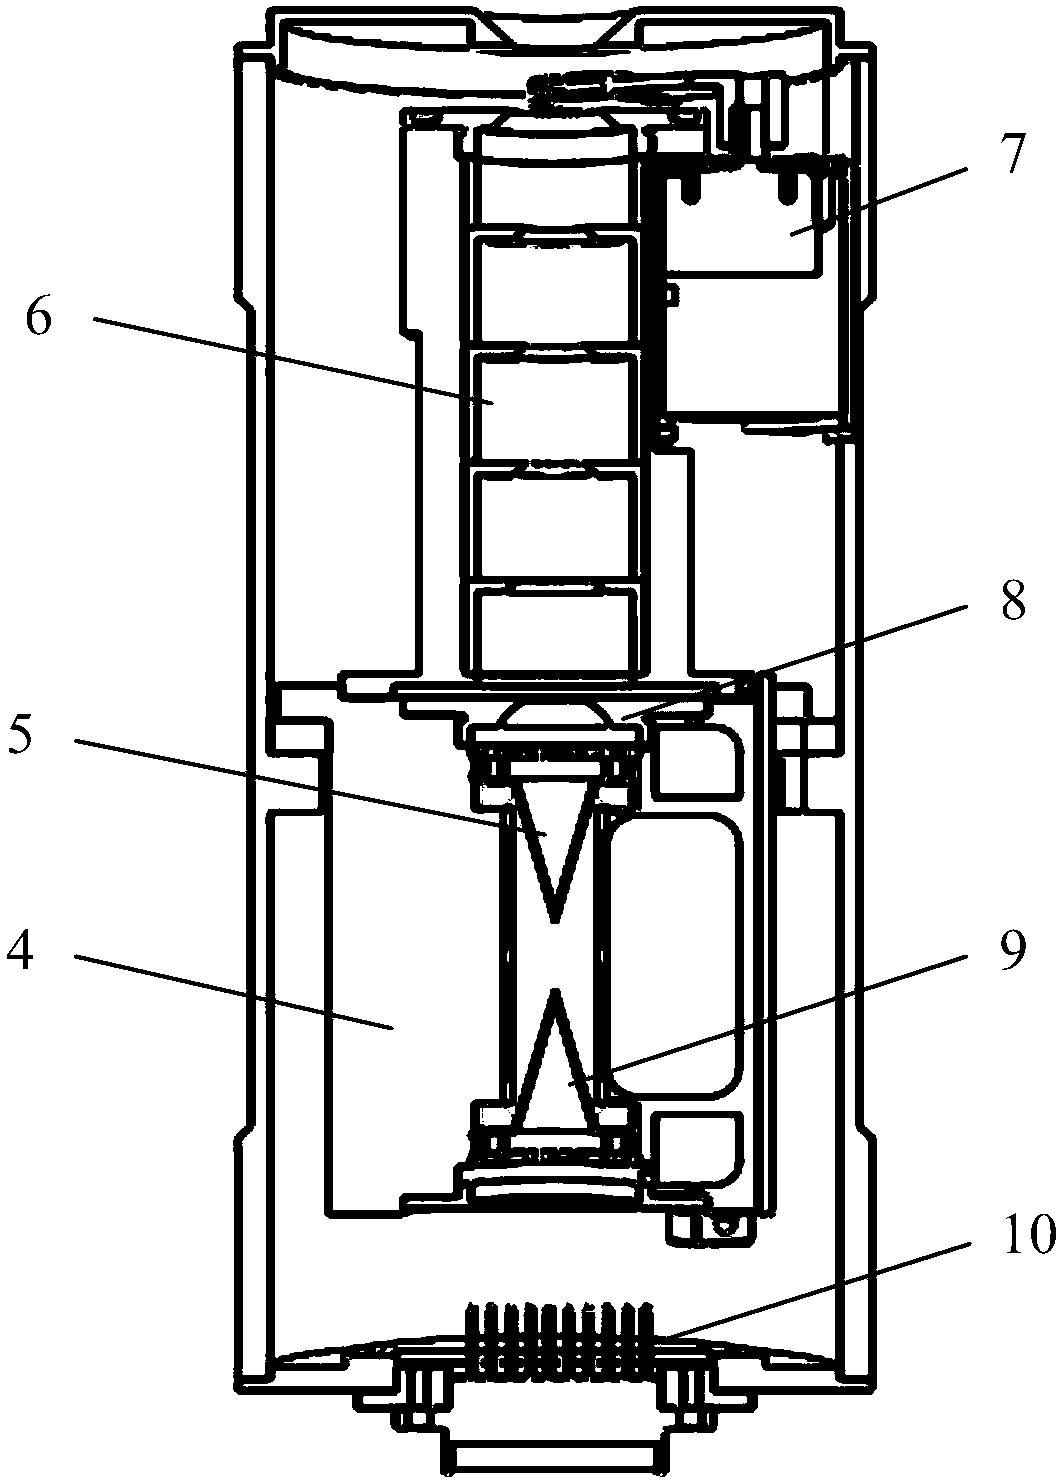 Absolute radiometer and internal thermal structure of radiometer for solar irradiance calibration